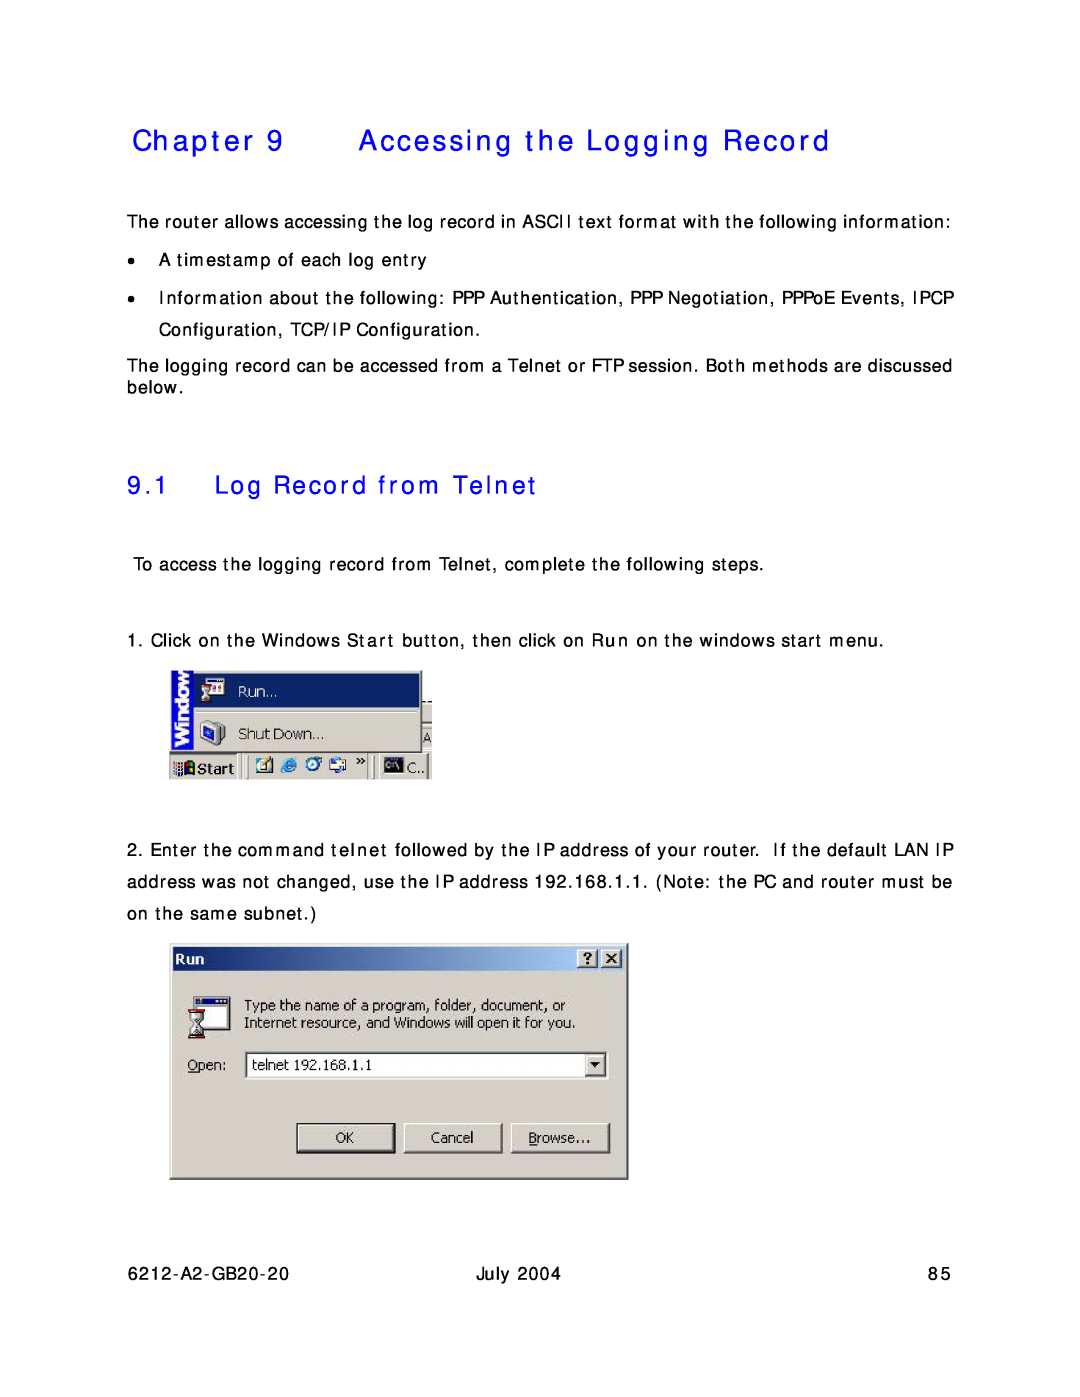 Paradyne 6212 manual Accessing the Logging Record, Log Record from Telnet 